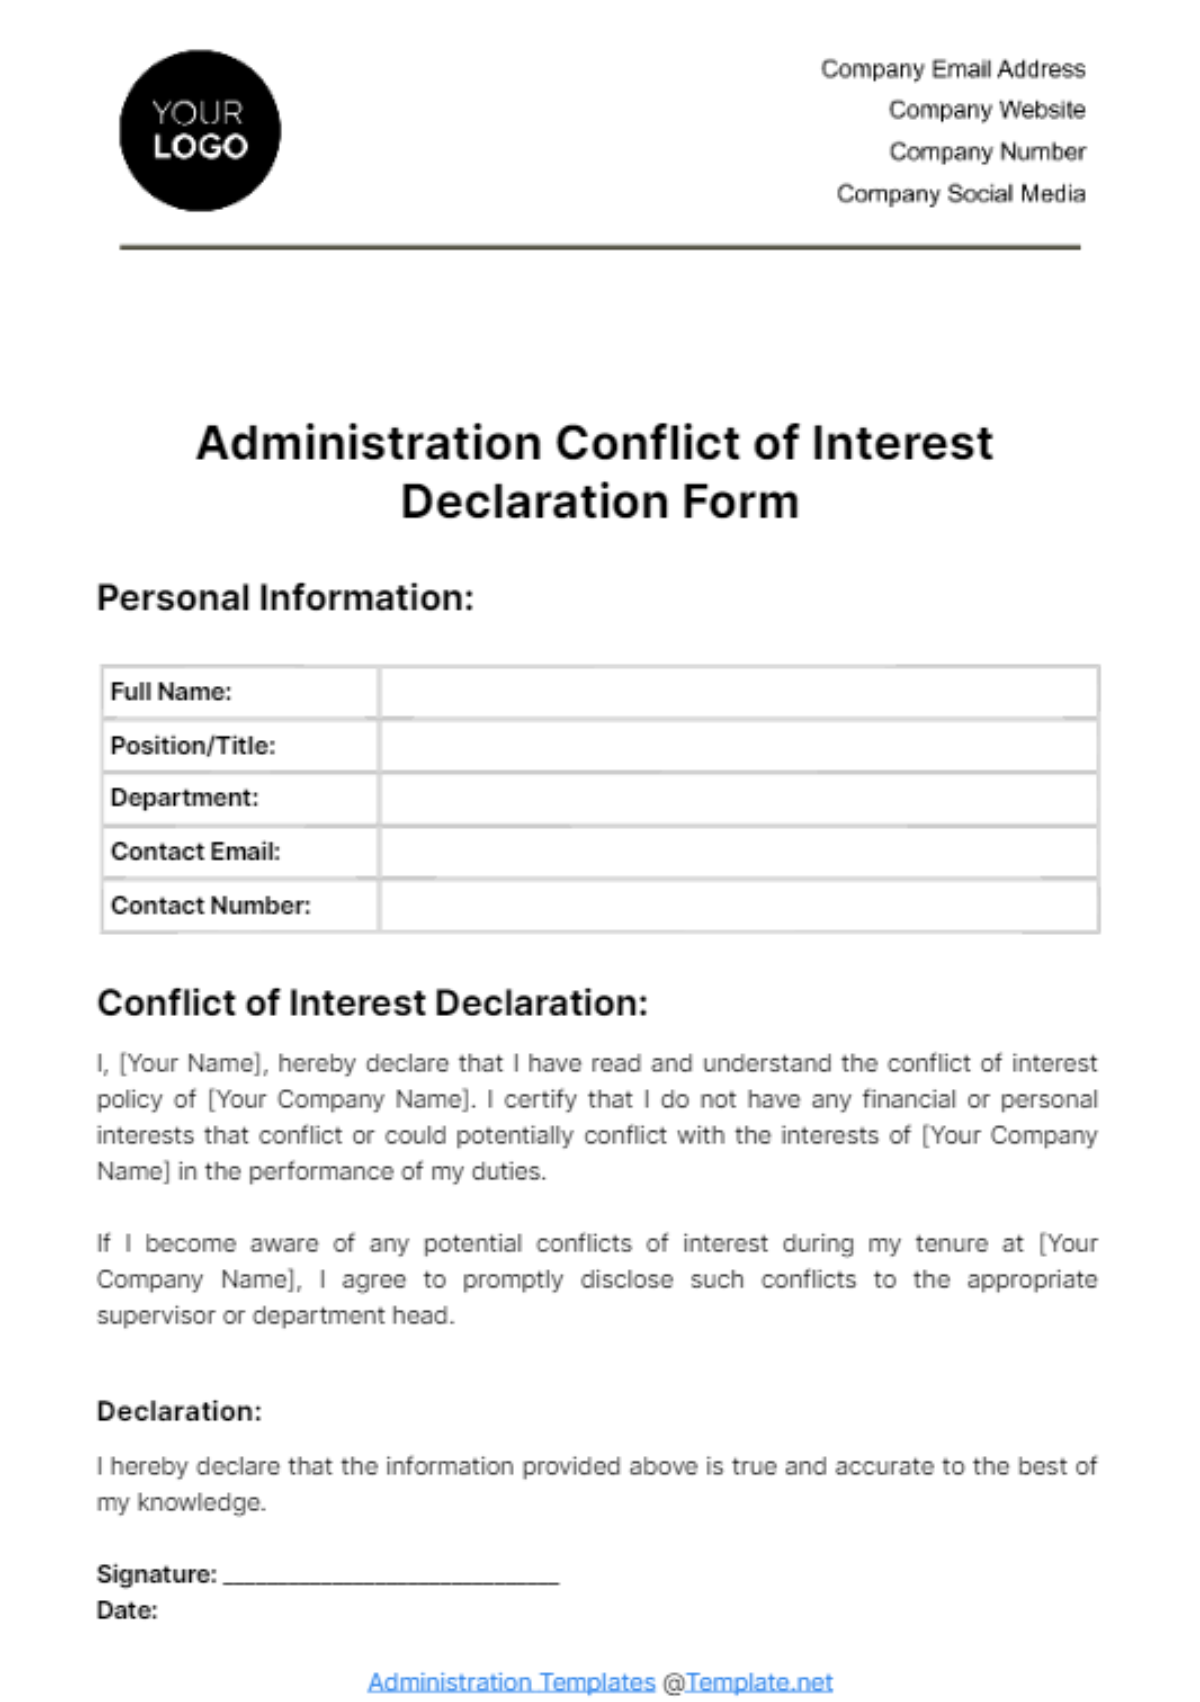 Free Administration Conflict of Interest Declaration Form Template